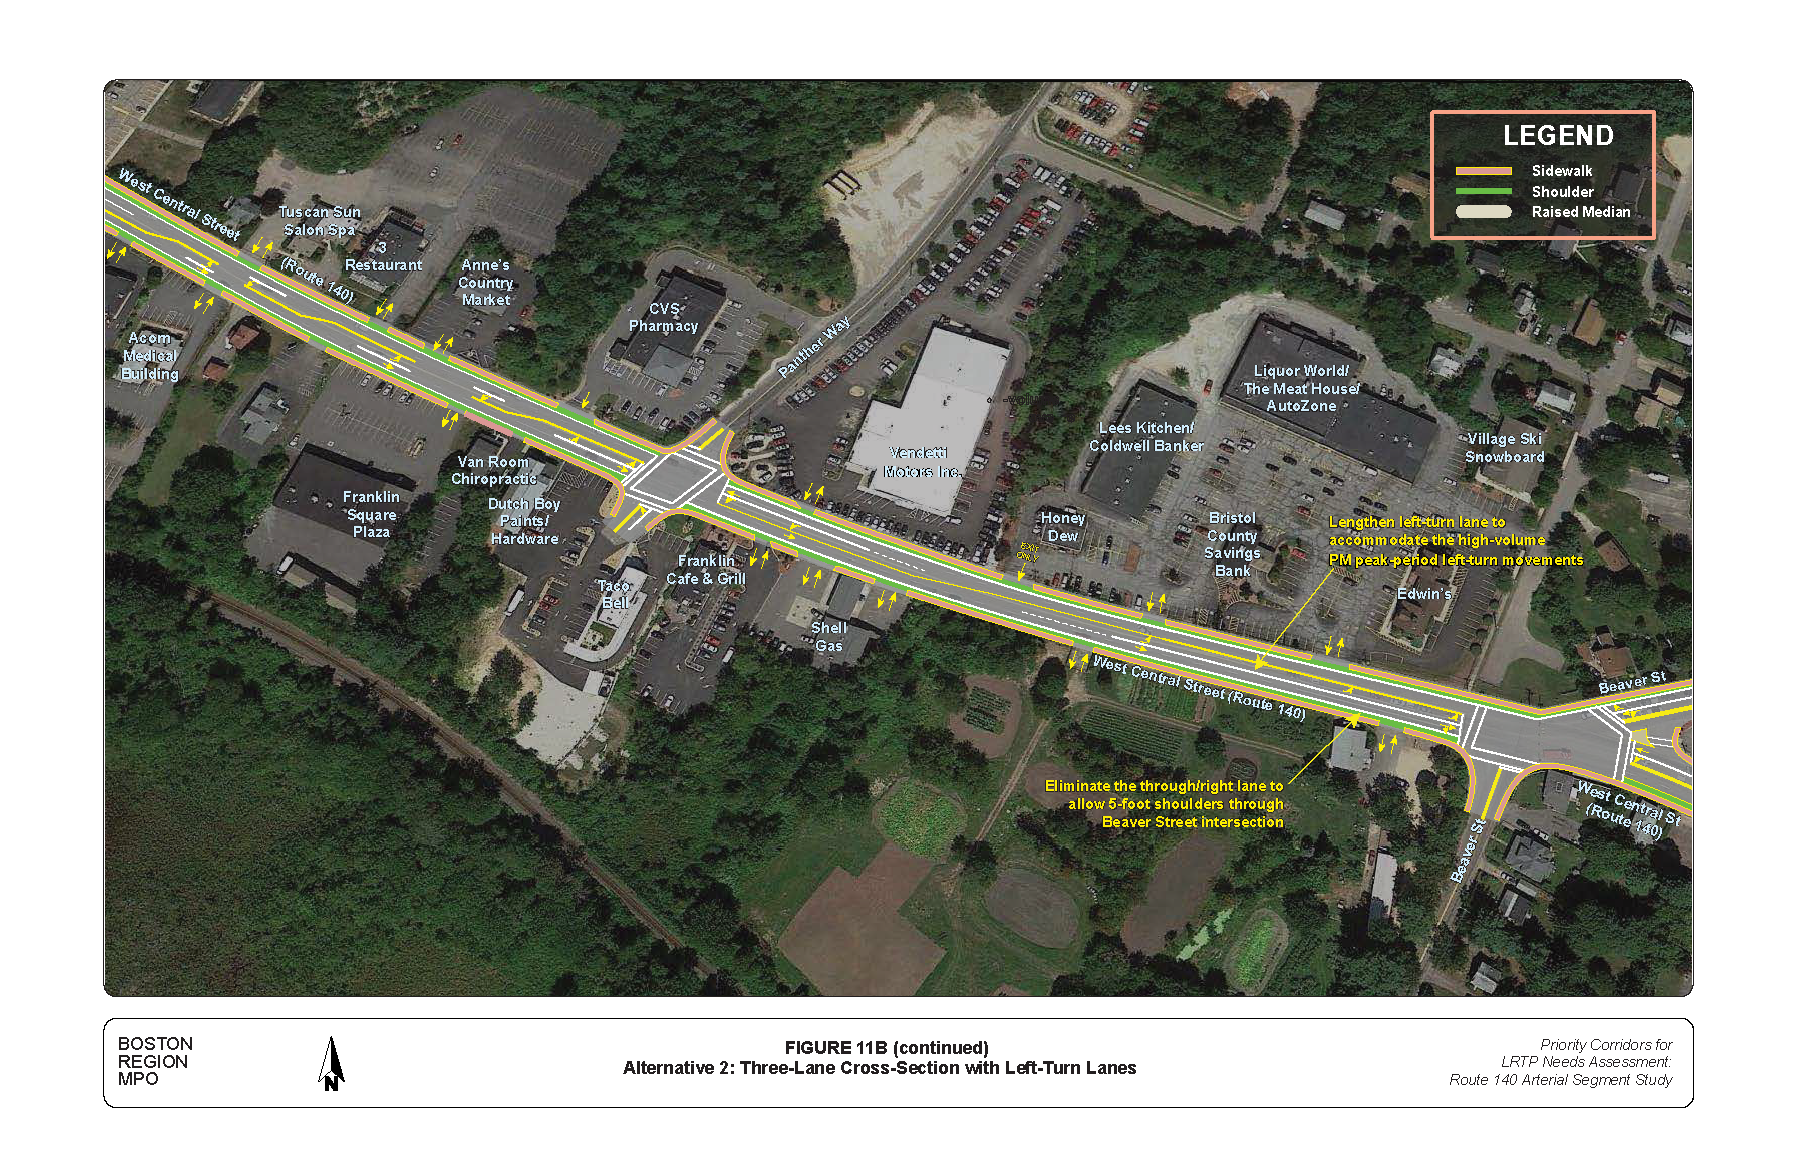 FIGURE 11B (continued): Alternative 2: Three-Lane Cross-Section with Left-Turn Lanes. Aerial-view map that illustrates MPO staff “Improvement Alternative 2,” which recommends reconfiguring West Central Street into a three-lane cross-section with left-turn lanes.